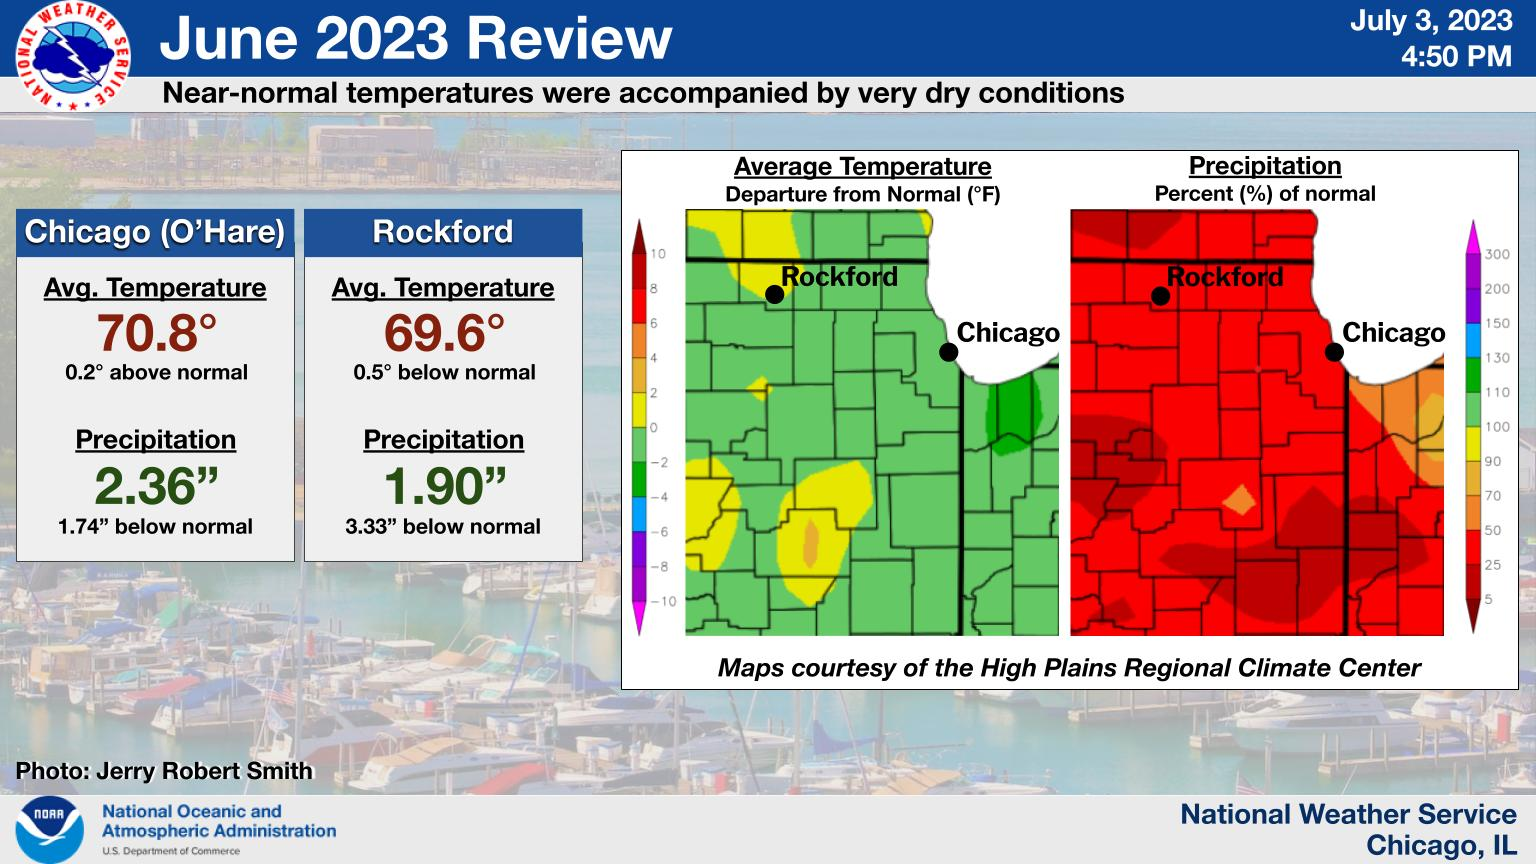 Climate summary graphic for northern Illinois and northwest Indiana for April 2023. Headline: April 2023 Review.  Sub Headline: Dry with a Wide Range of Conditions. Chicago: Average Temperature: 51.8Â°, 2.0Â° above normal; Precipitation: 2.02â€, 1.73â€ below normal; Snowfall: 0.5â€, 0.8â€ below normal. Rockford: Average Temperature: 49.2Â°, 0.1Â° above normal; Precipitation: 2.68â€, 1.07â€ below normal; Snowfall: 0.9â€, equal to normal. Graphic Created: Monday, May 1, 2023 10:54 PM CDT